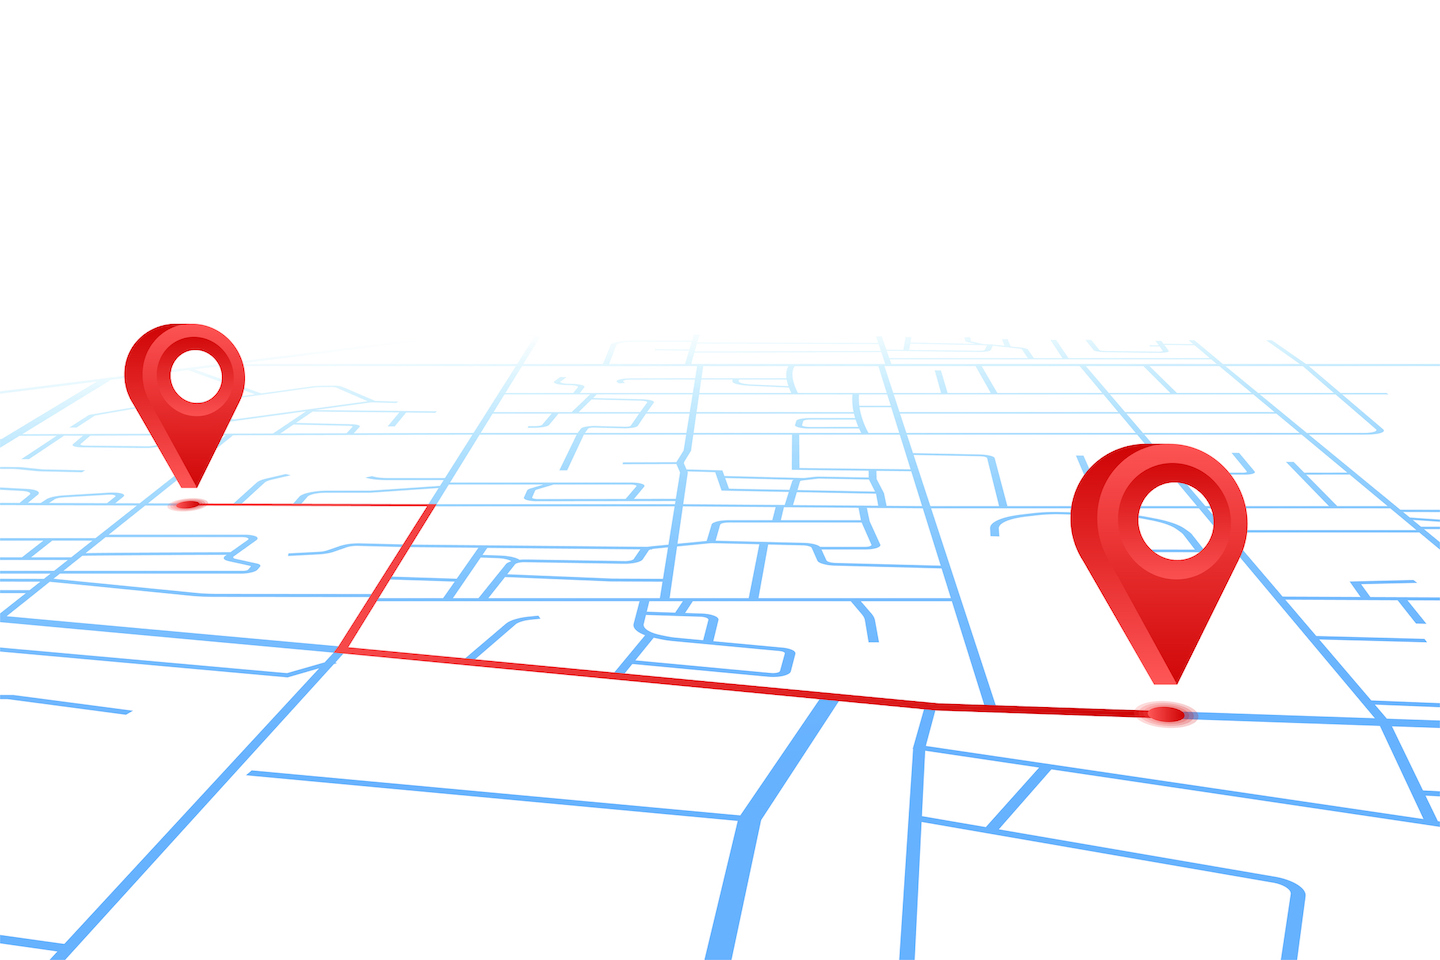 Is Your Business Address Compliant With Google My Business Rules?